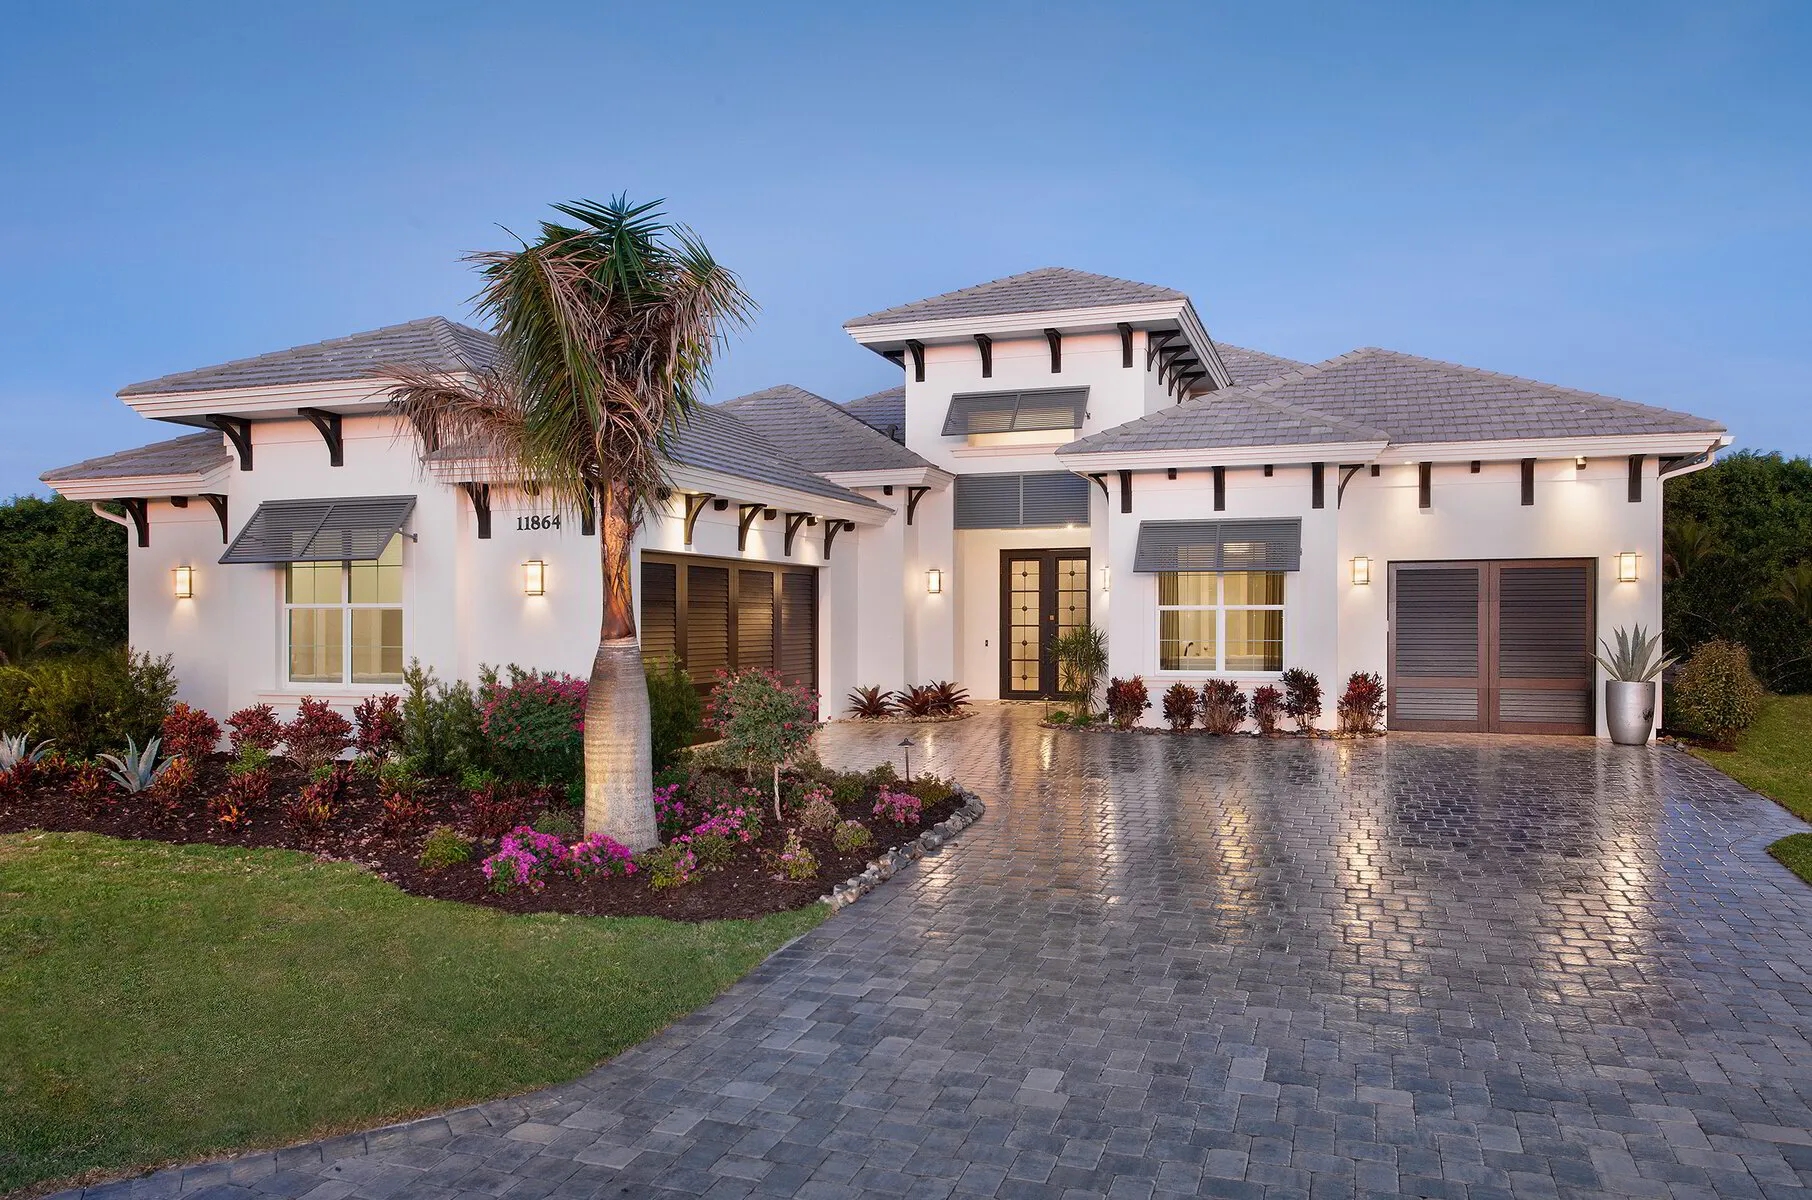 image of a beautiful house in florida